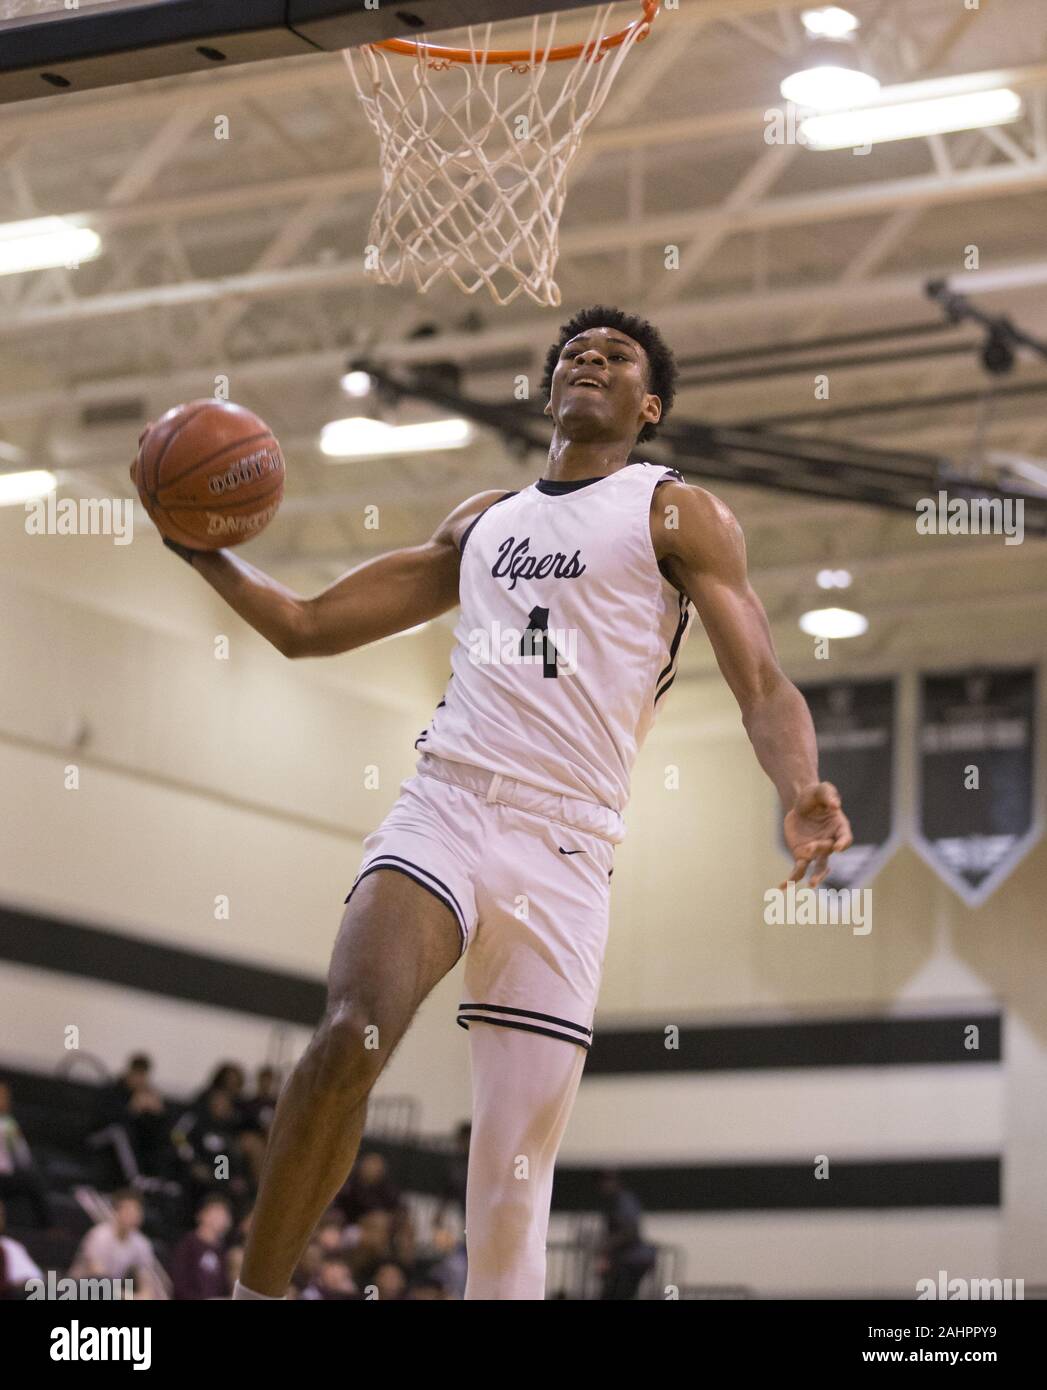 Austin, Texas, USA. 31st Dec, 2019. Vandegrift Vipers forward Greg Brown  (4) goes up for a dunk during a high school basketball game in Austin,  Texas, on Dec. 31, 2019. Brown is